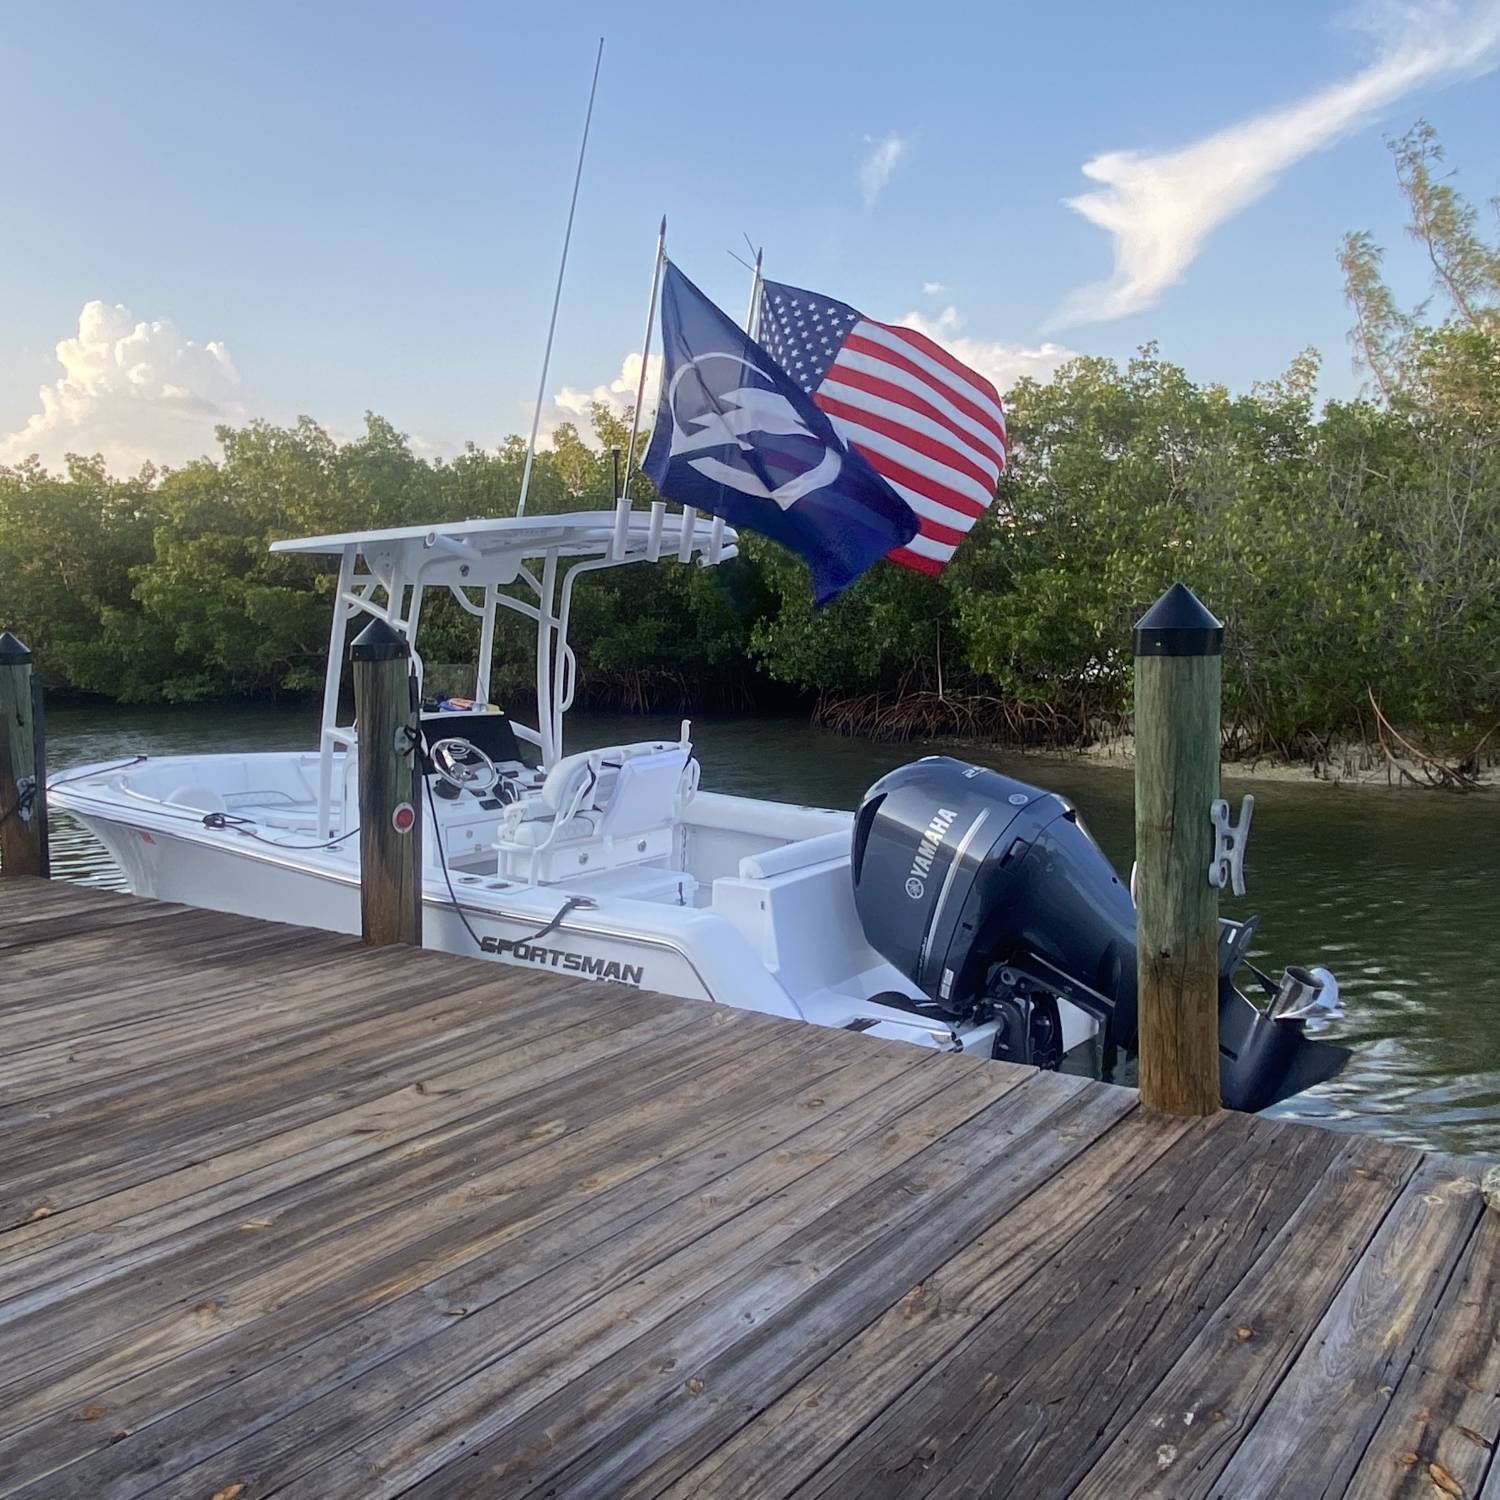 Title: Sportsman Life - On board their Sportsman Open 232 Center Console - Location: Palm Island FL. Participating in the Photo Contest #SportsmanJune